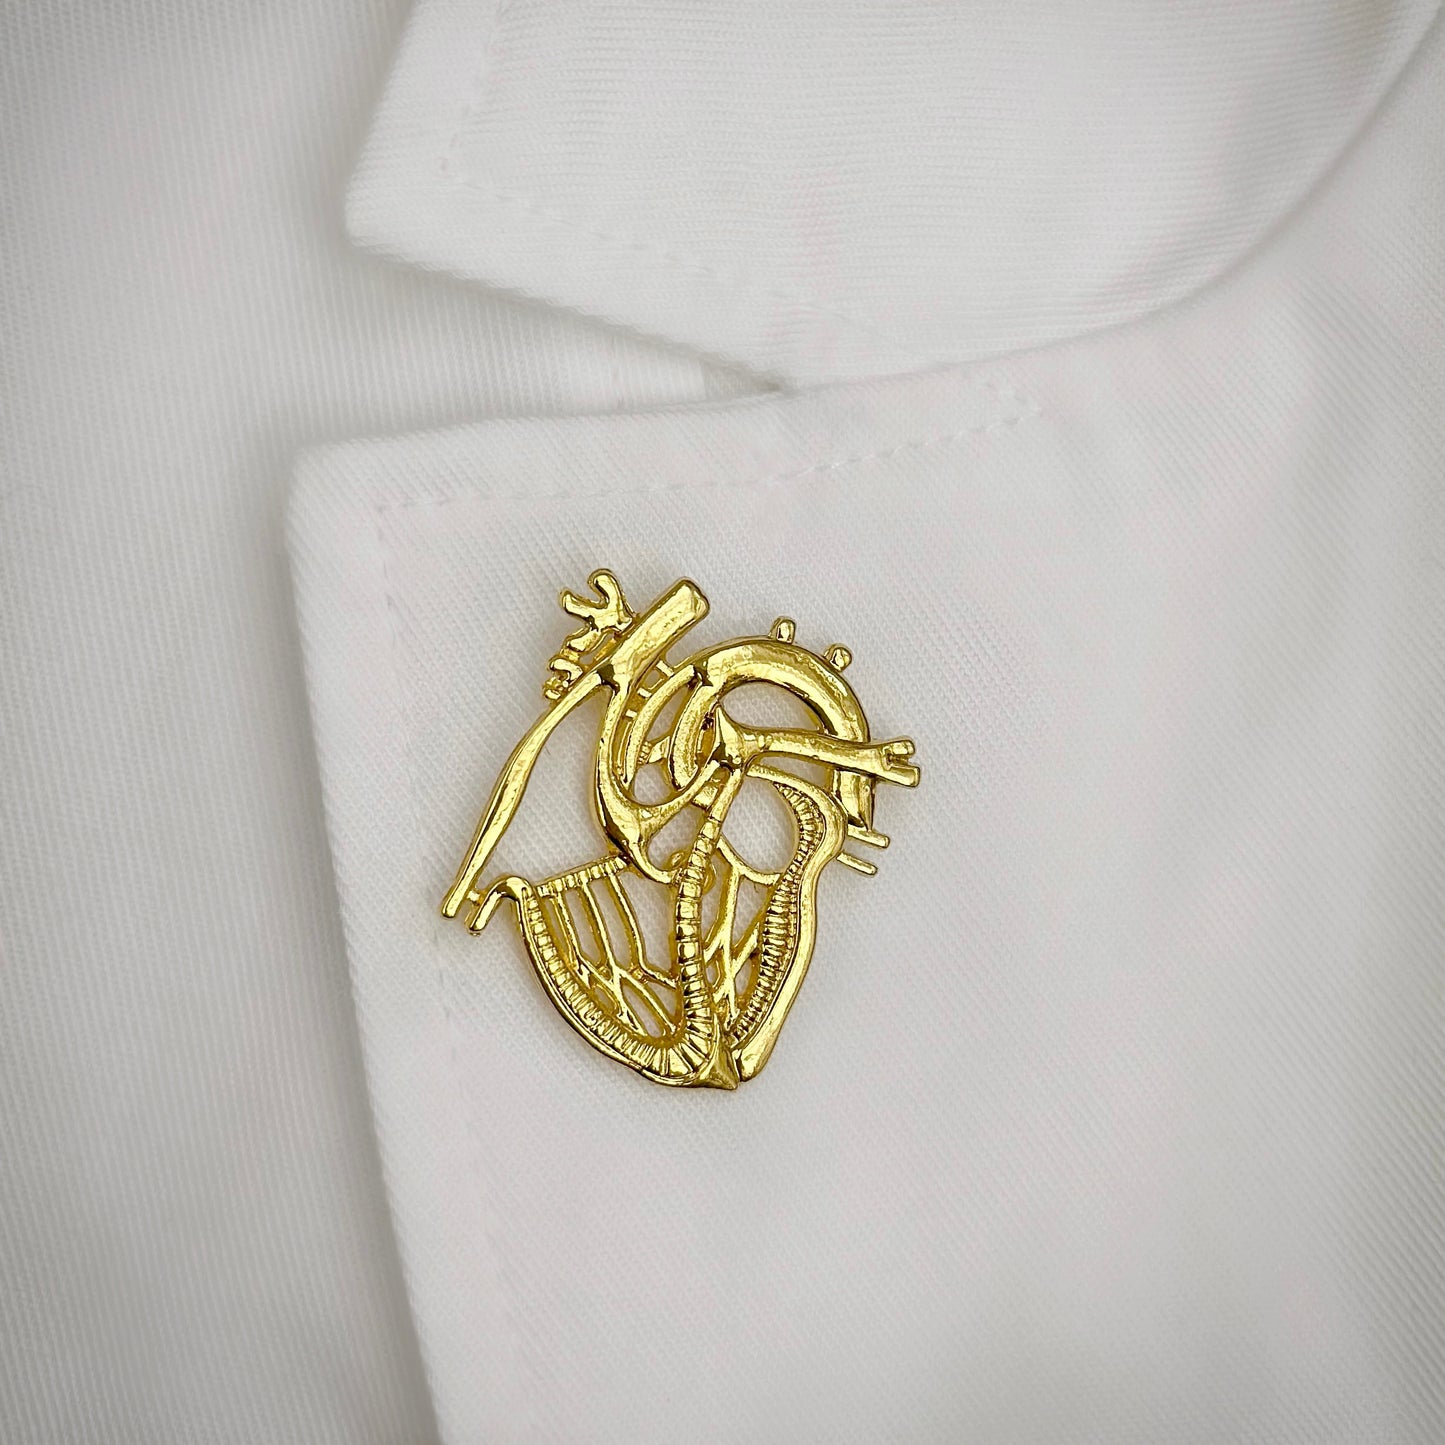 Anatomical Heart White Coat pin, cardiology, cardiologist gift.